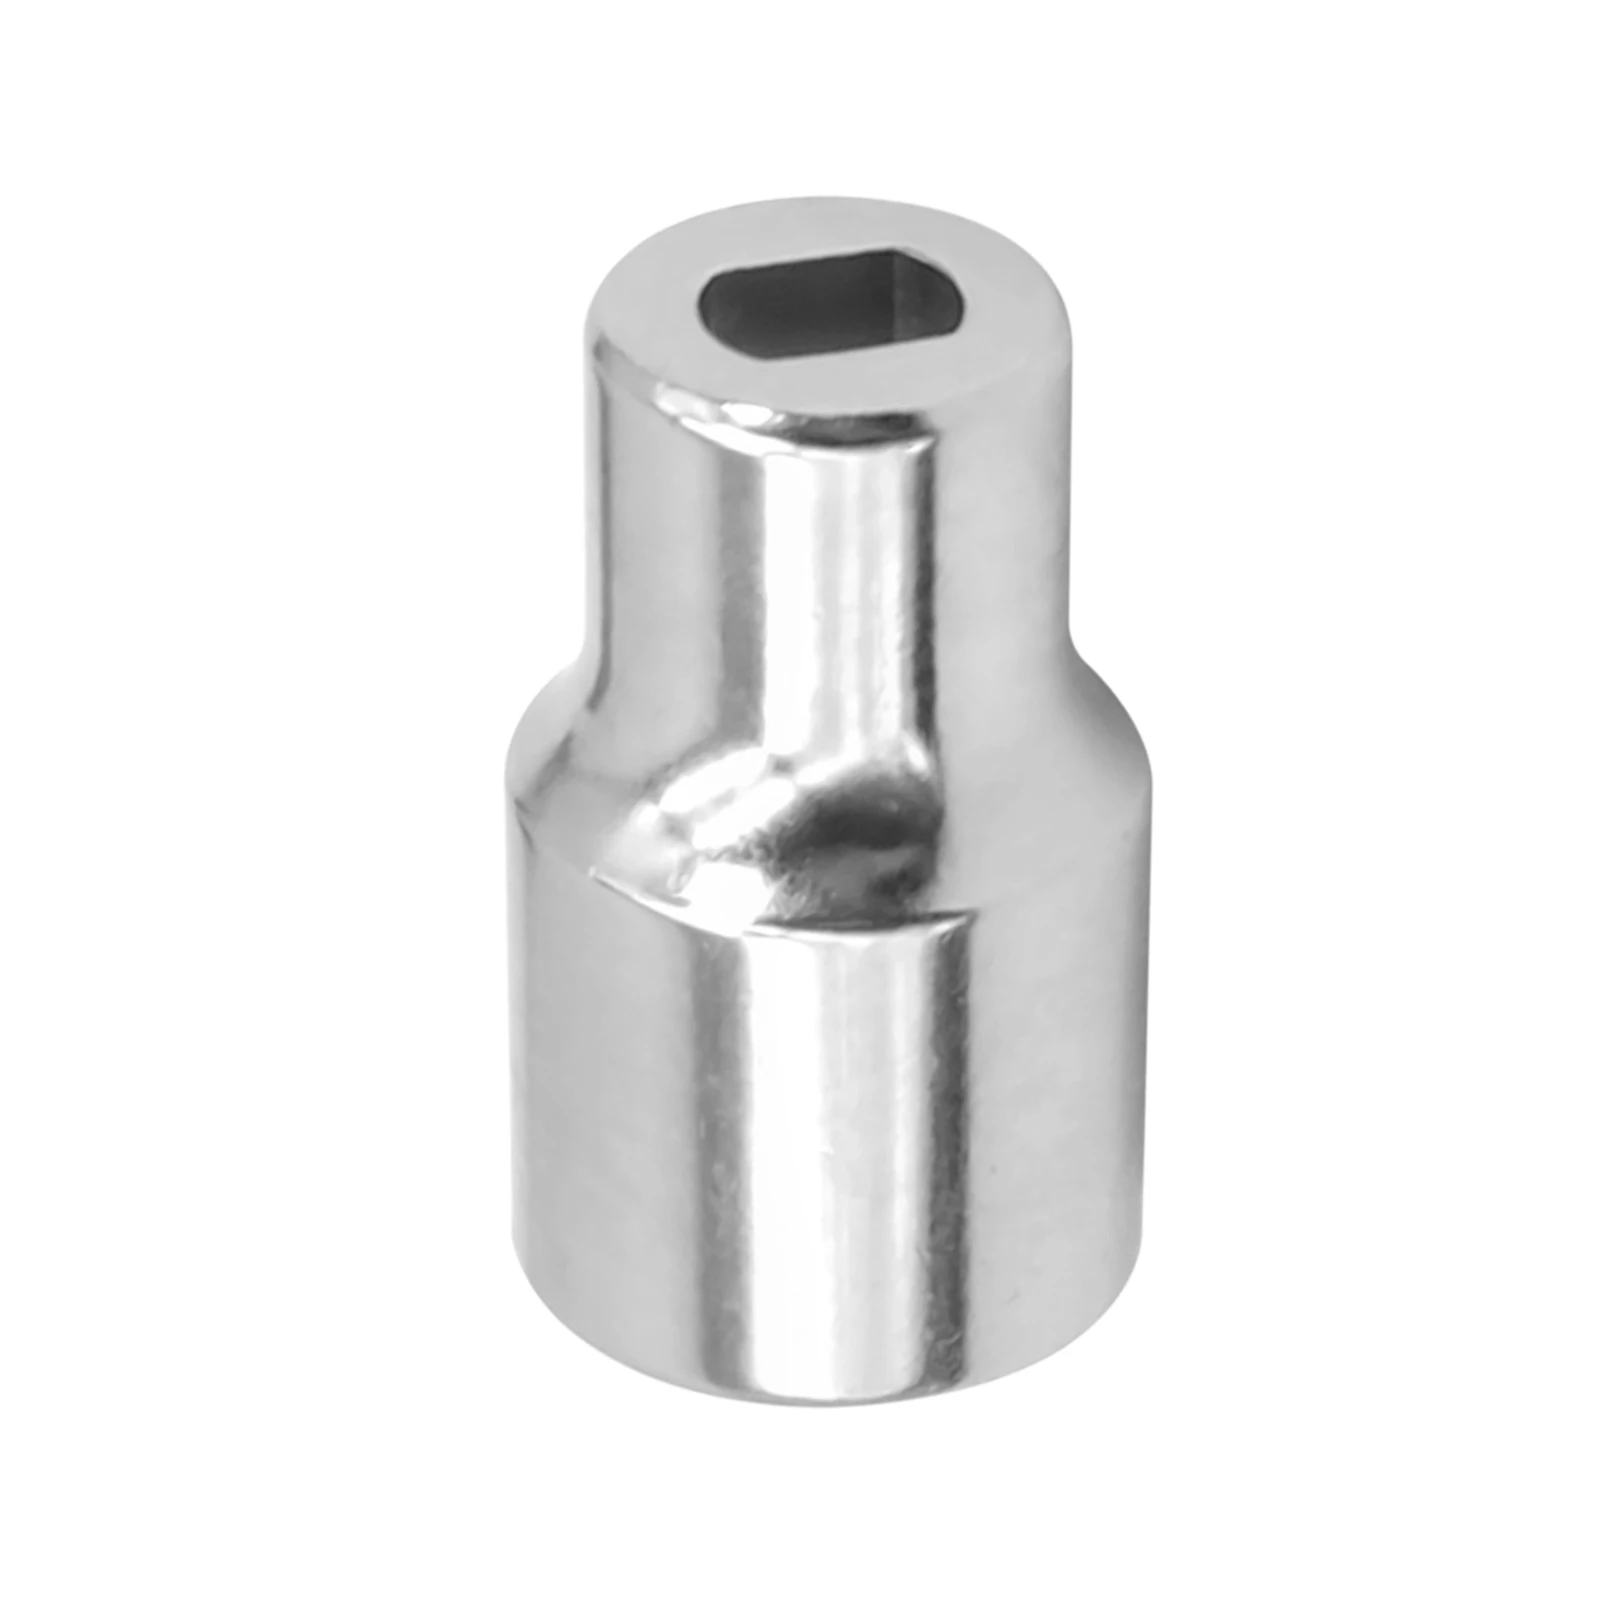 25284 Steel Shock Absorber Socket 3/8 Drive Remove Replace Absorbers Fit the Double D Stem Tools for GM Cars